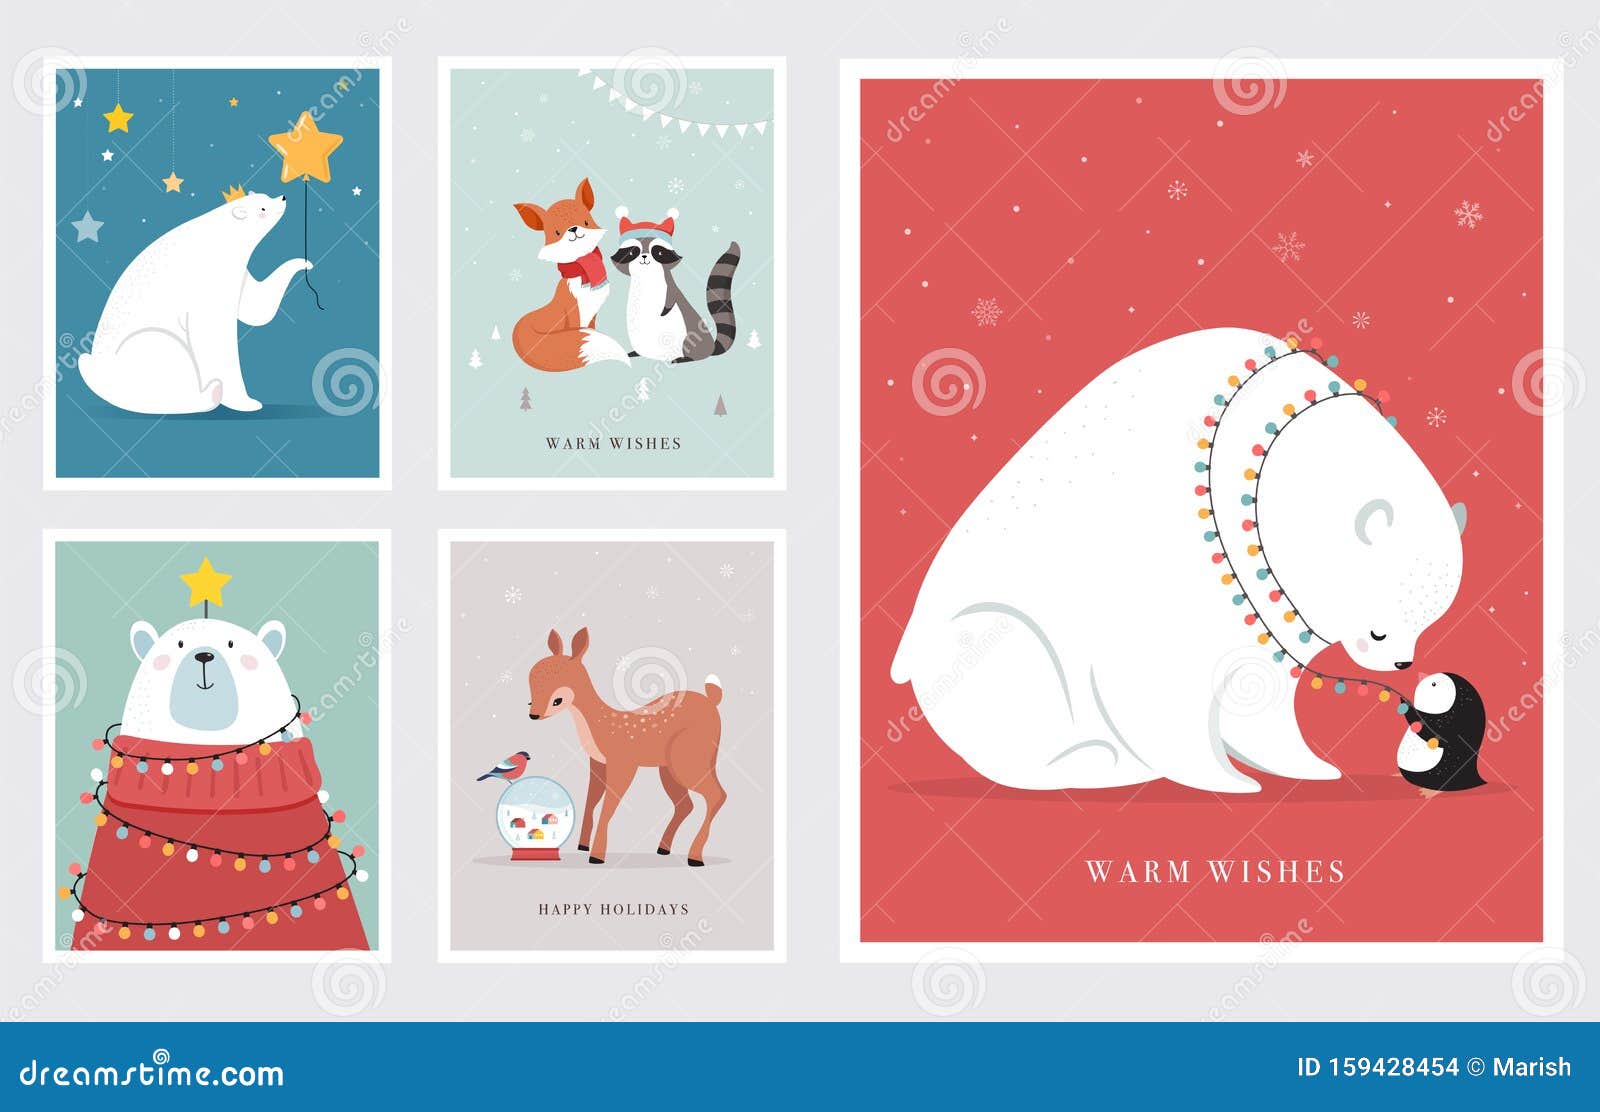 Download Winter Forest Animals, Merry Christmas Greeting Cards ...